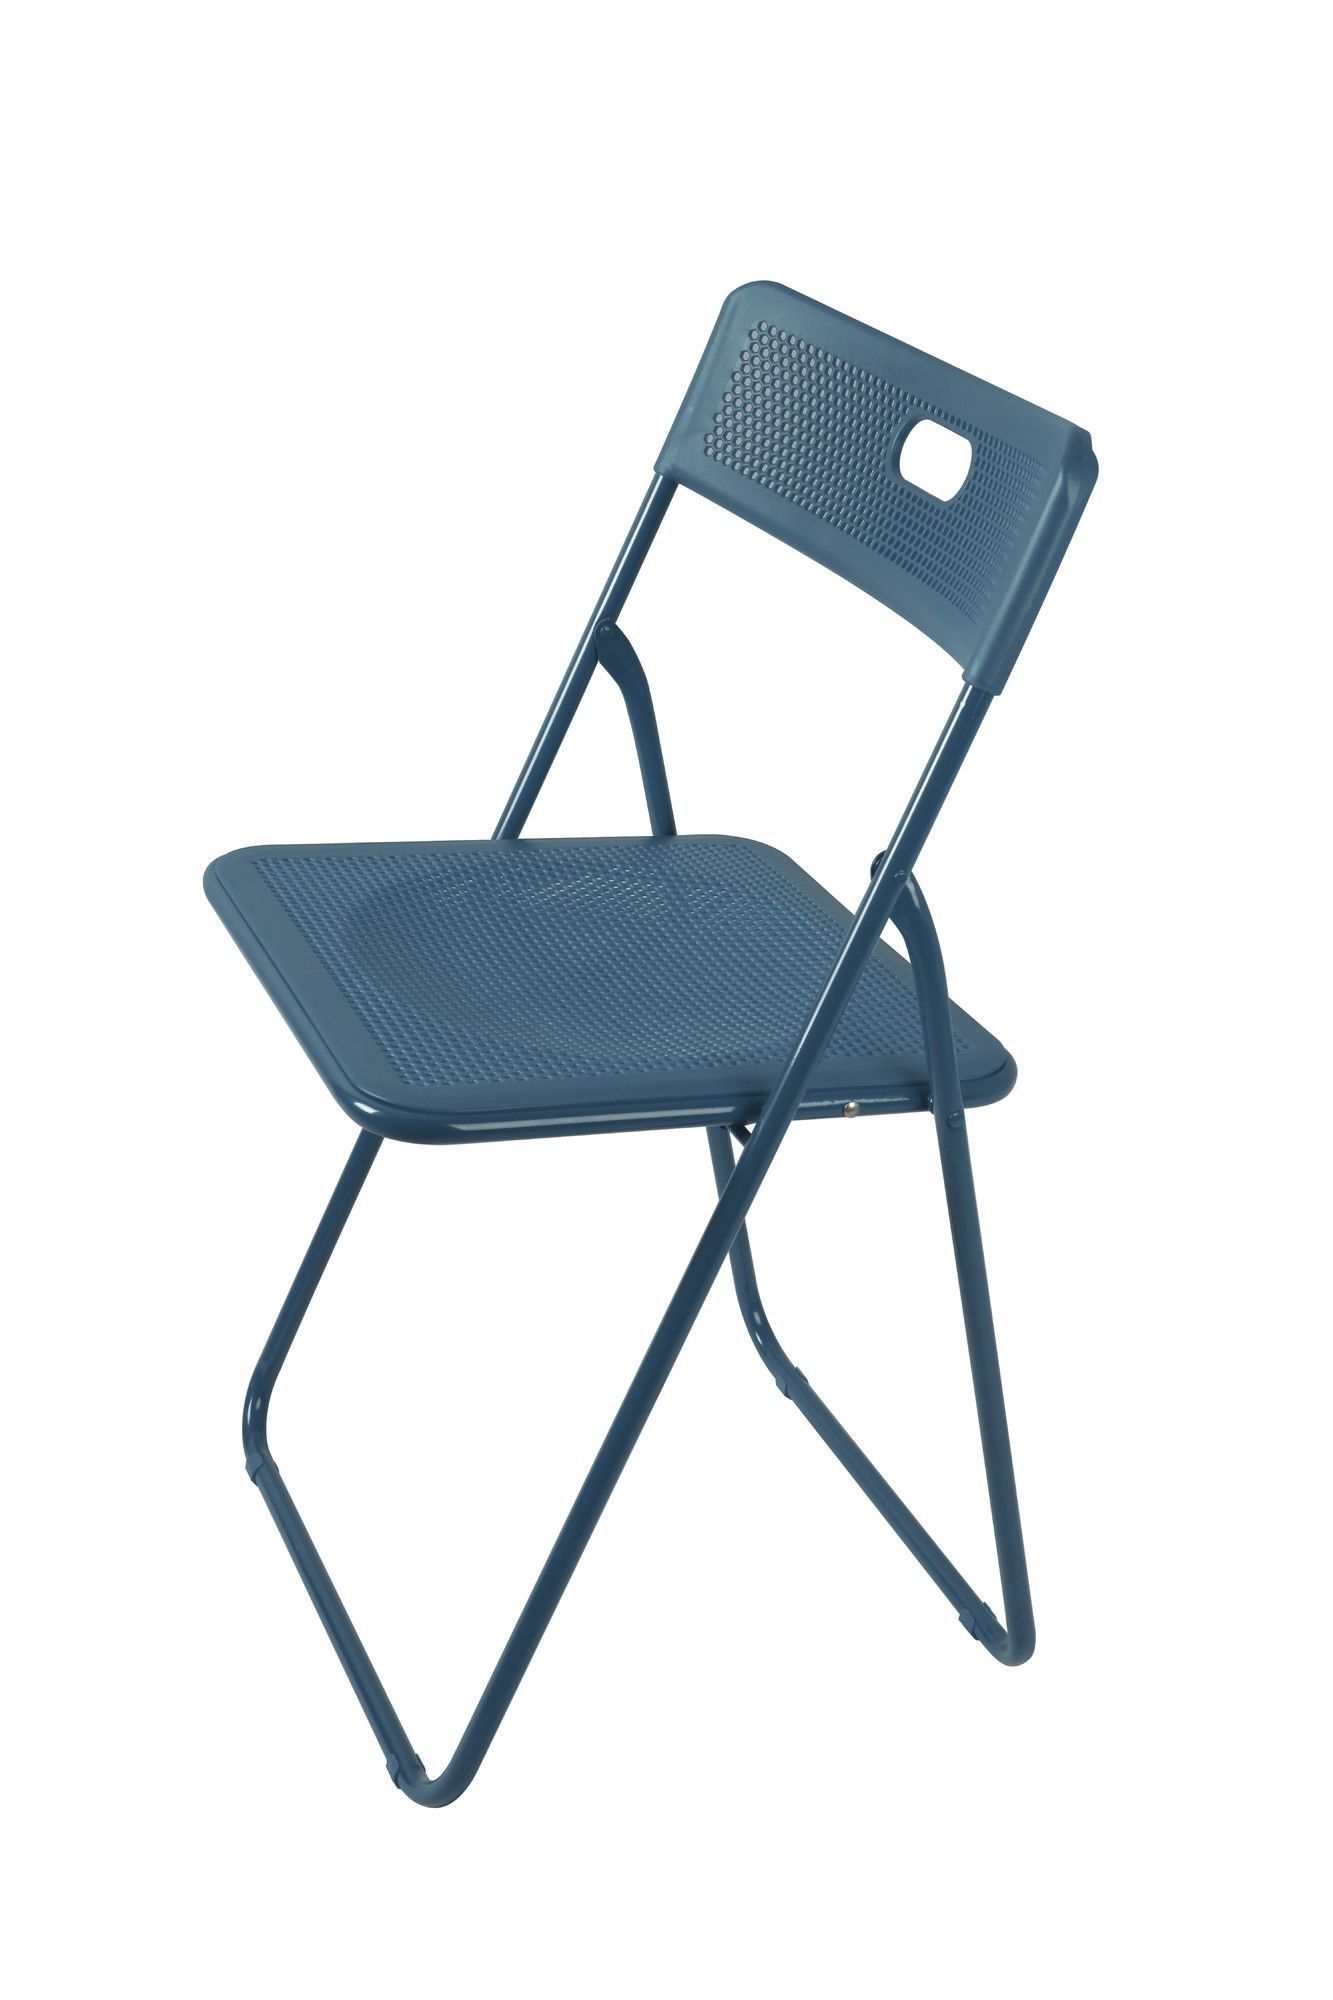 2019 Alexa Firecracker Side Chairs Inside Honeycomb Folding Patio Dining Chair (View 11 of 20)